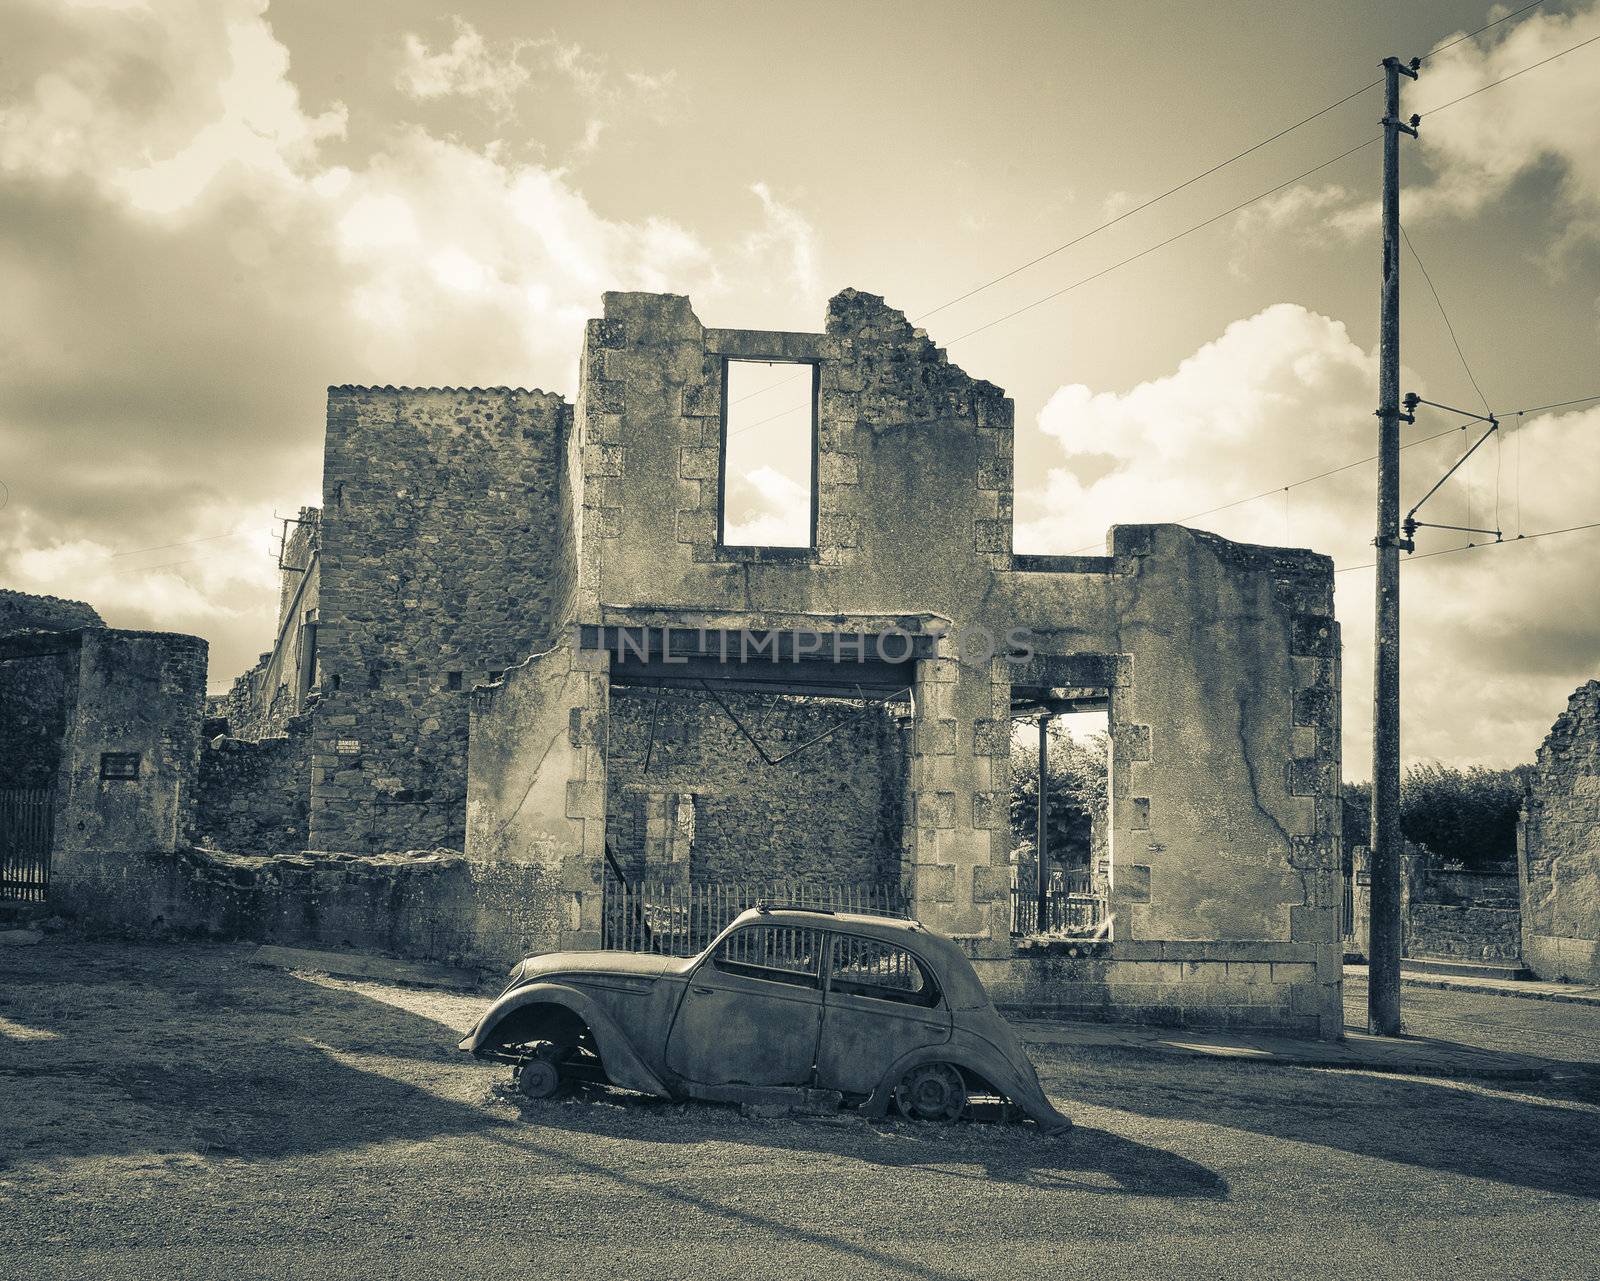 On June 10th 1944  642 inhabitants of Oradour-sur-Glane in the southern France was killed by the German SS and the village burned down. Burned out cars and buildings still tell the story.